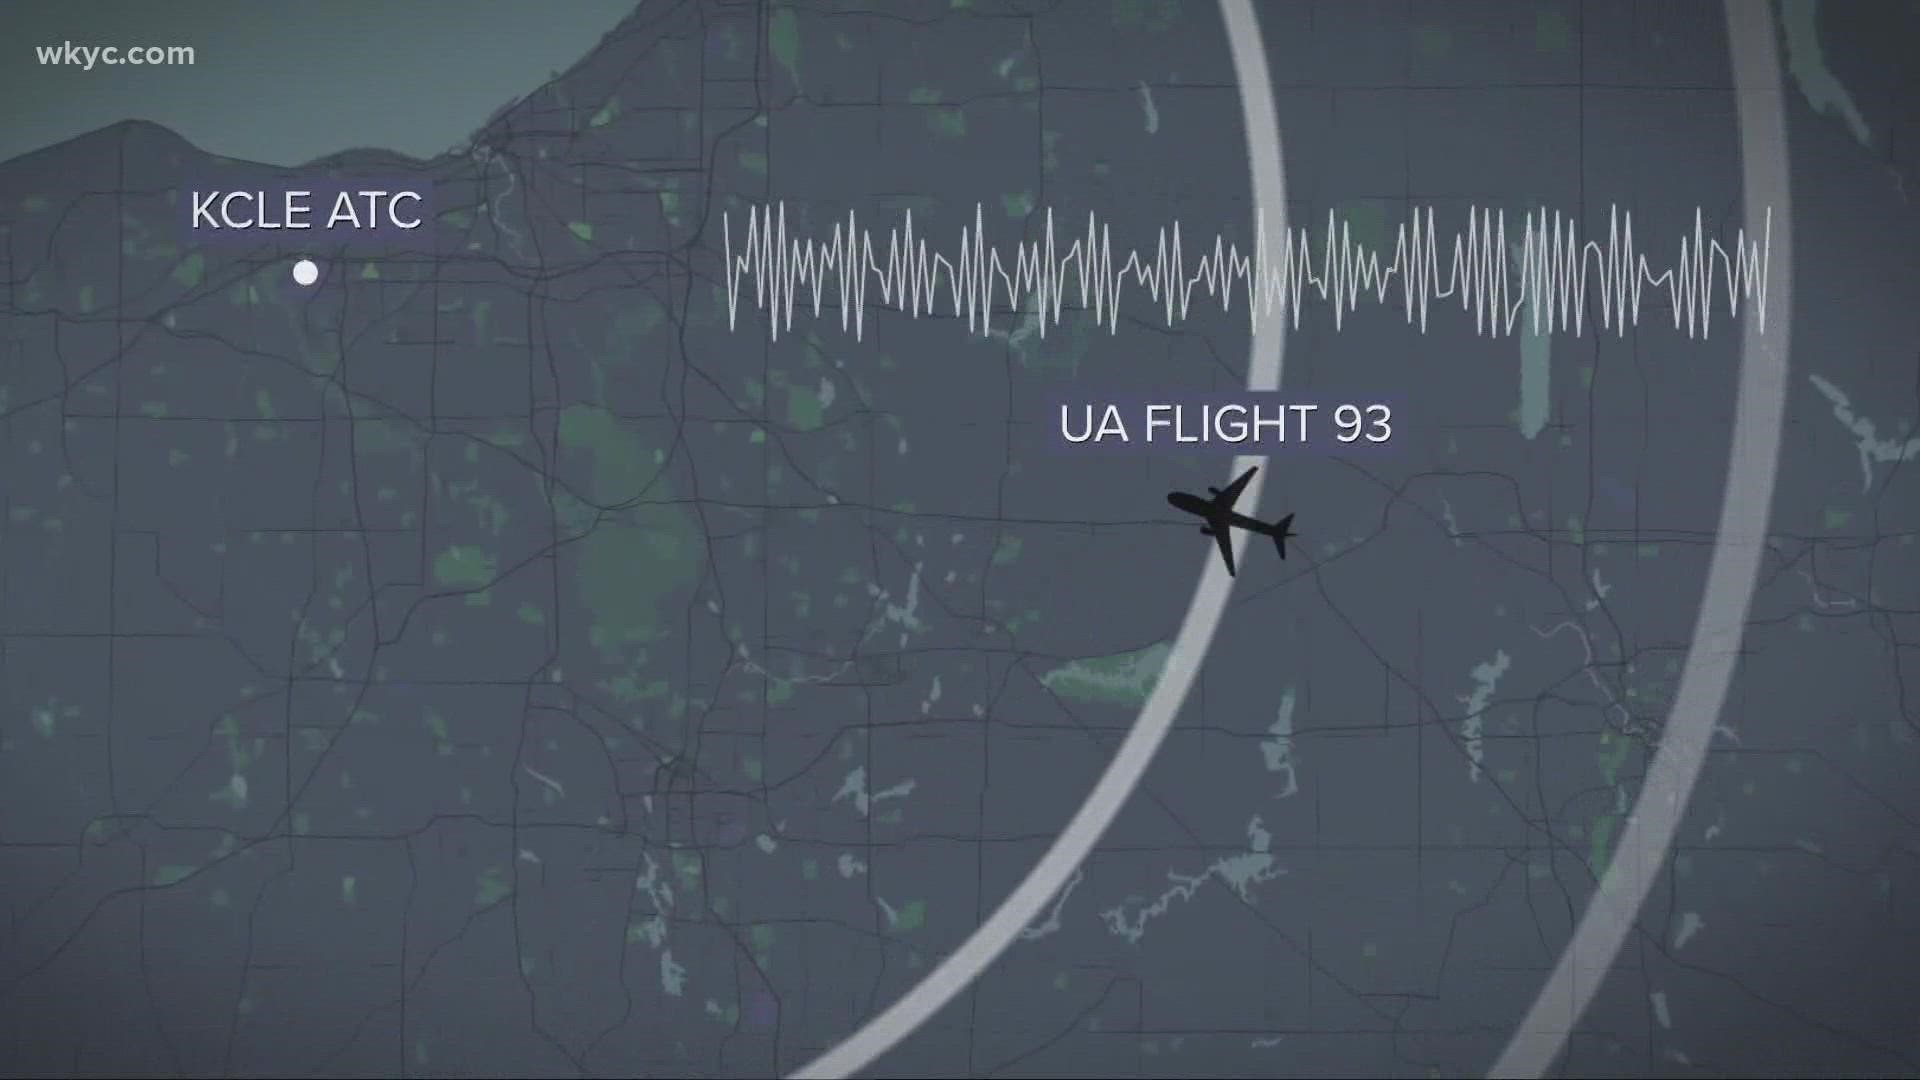 With United Flight 93 highjacked over Cleveland airspace, officials had to react quickly. 3News' Mark Naymik reports.